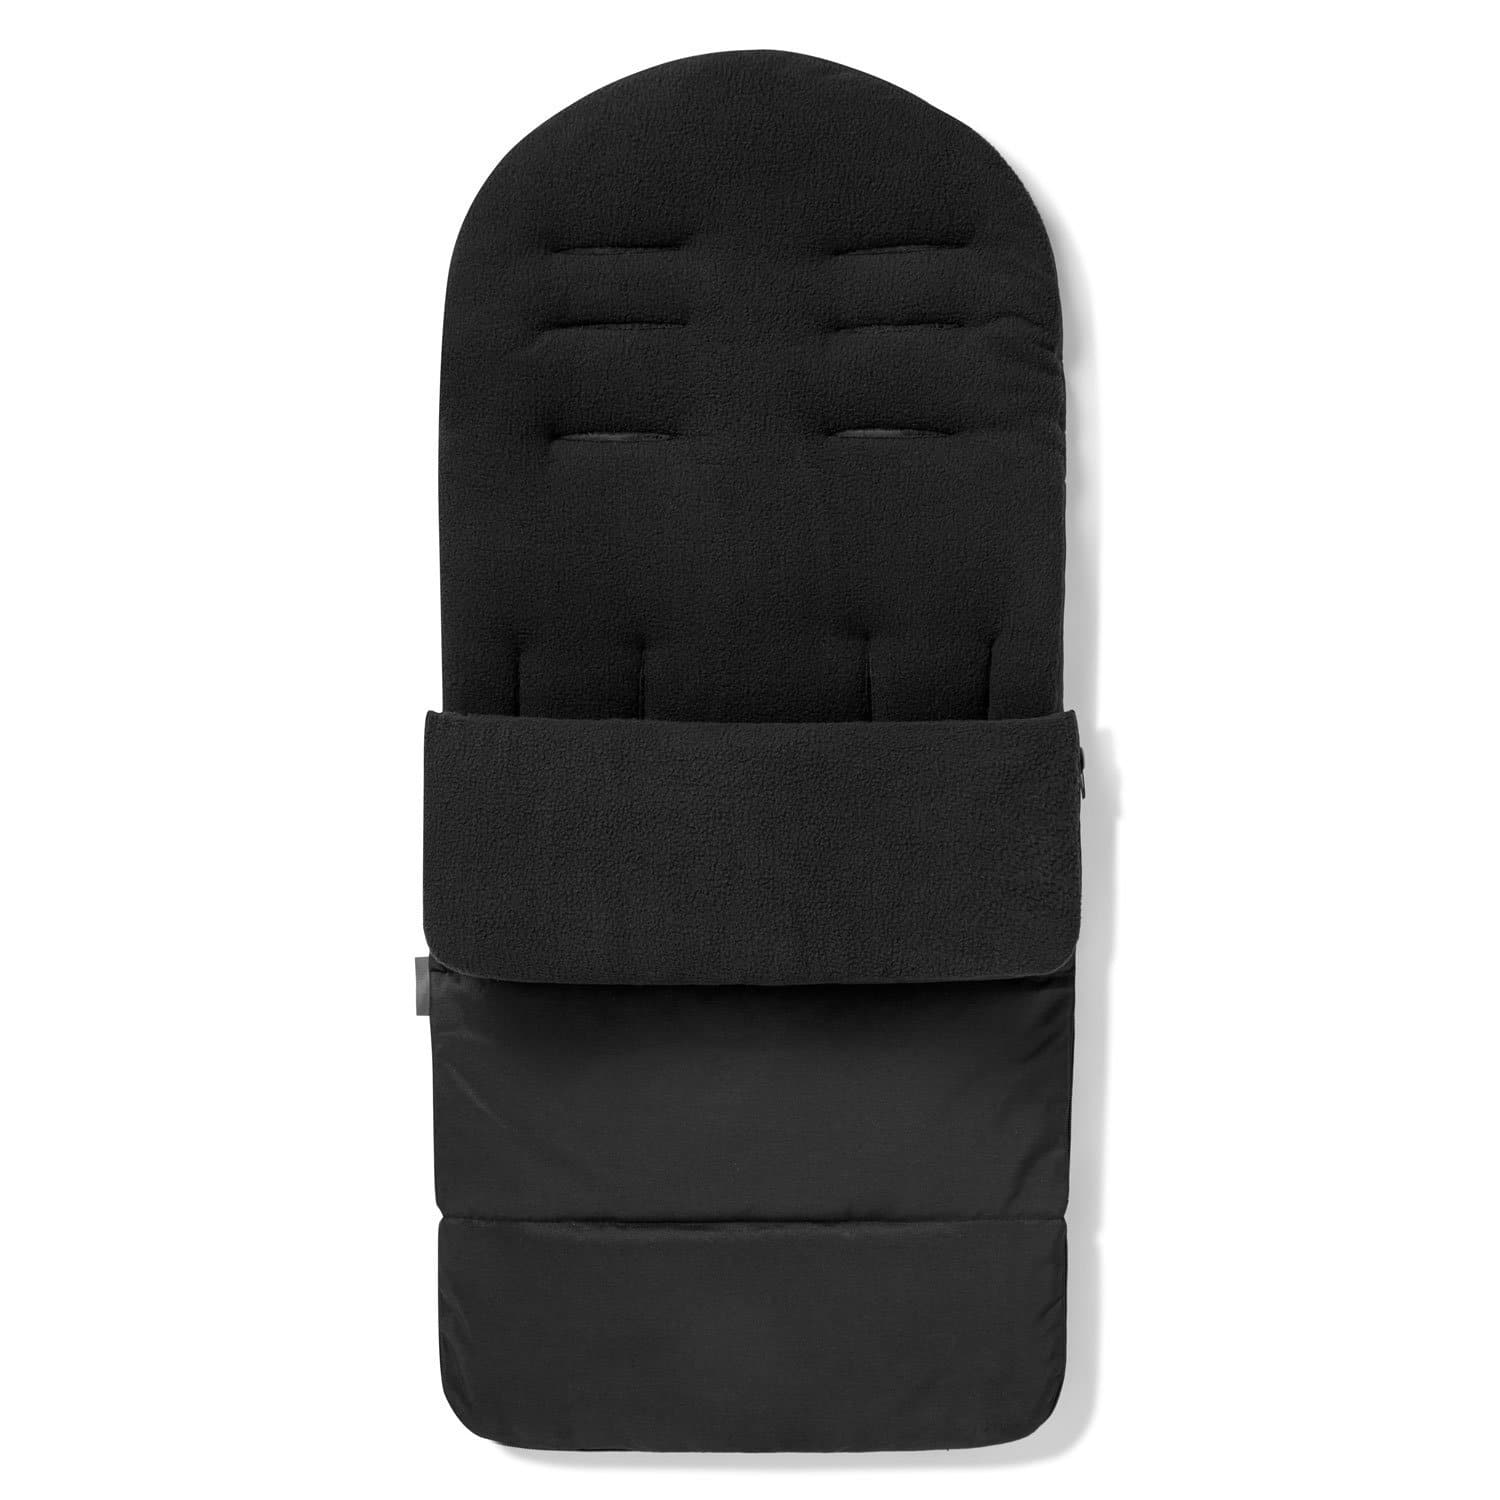 Premium Footmuff / Cosy Toes Compatible with Bloom - Black Jack / Fits All Models | For Your Little One